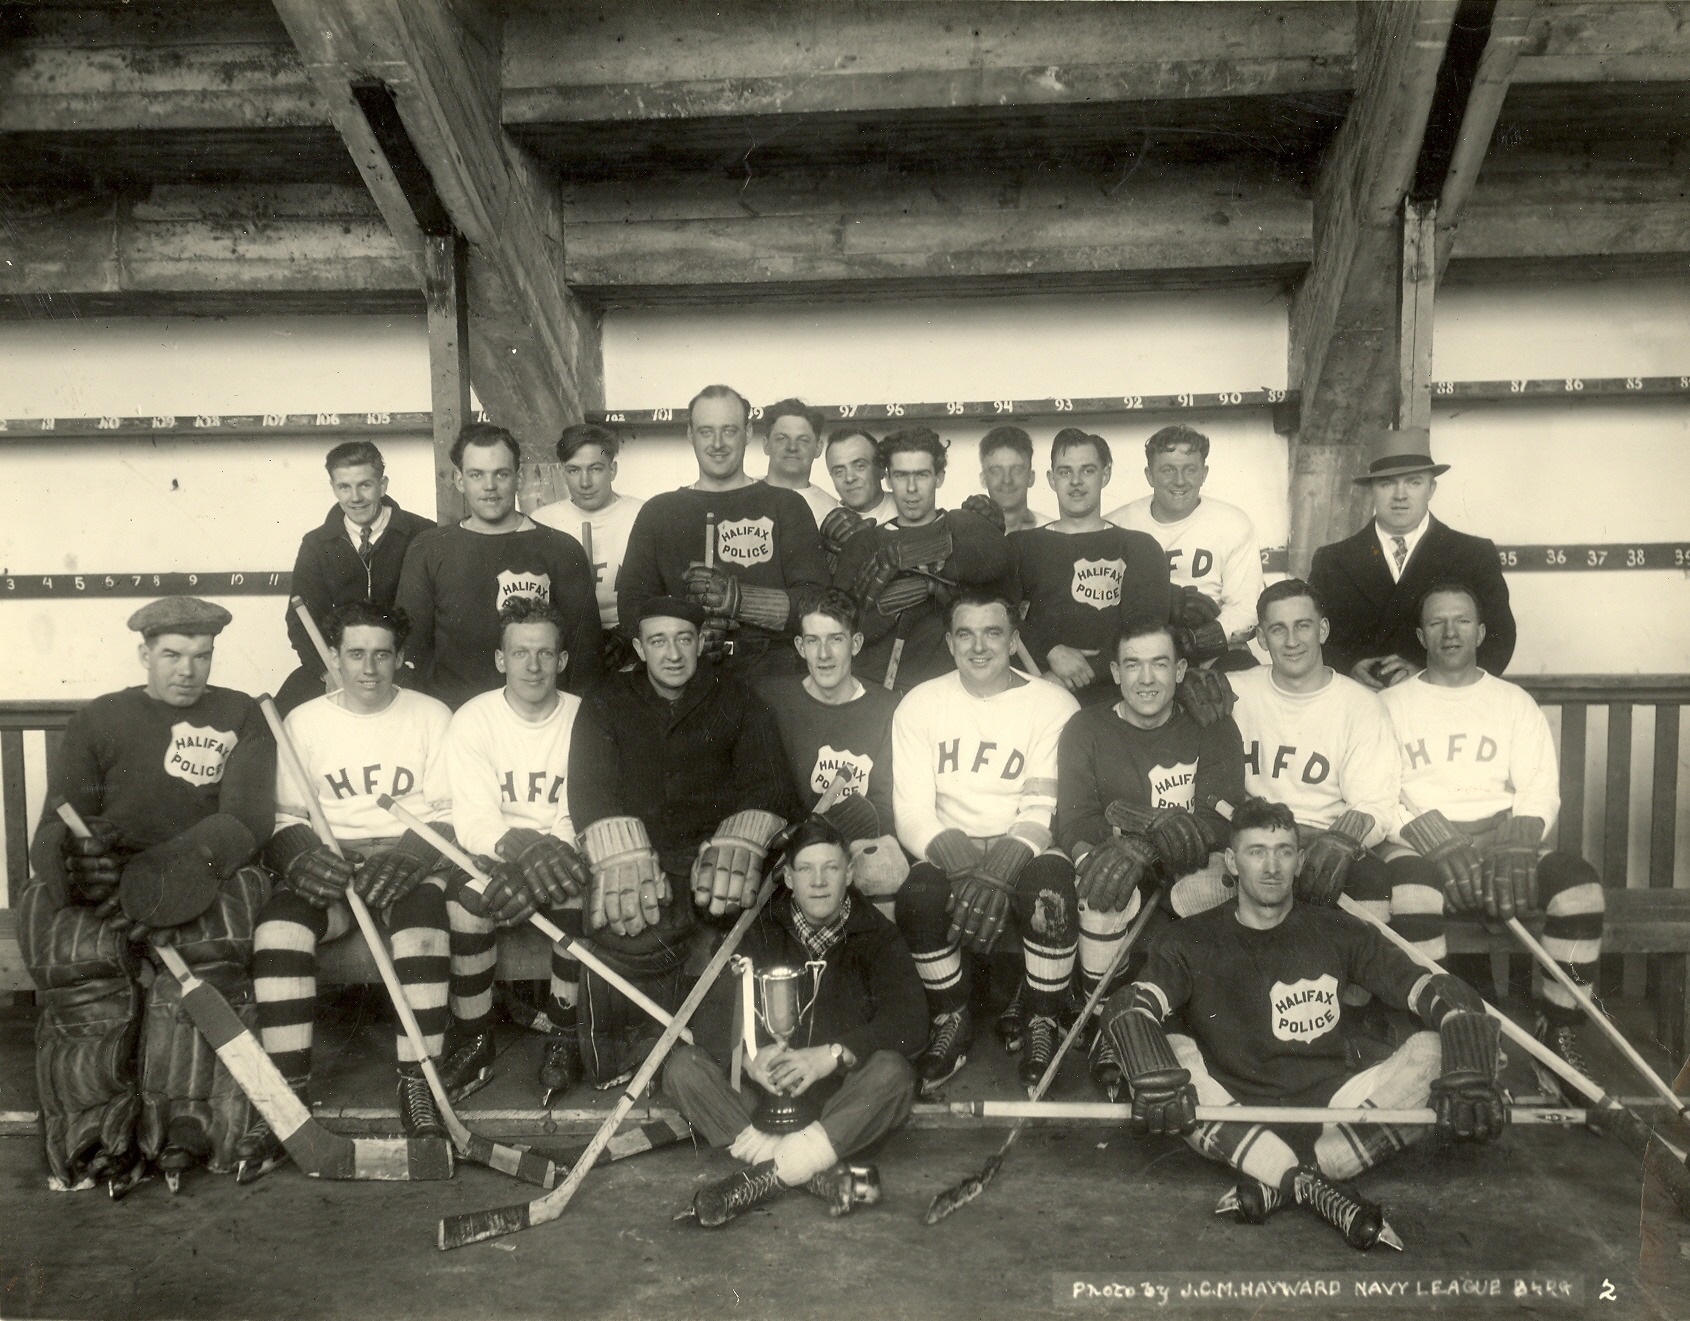 Black and white photograph of a hockey team